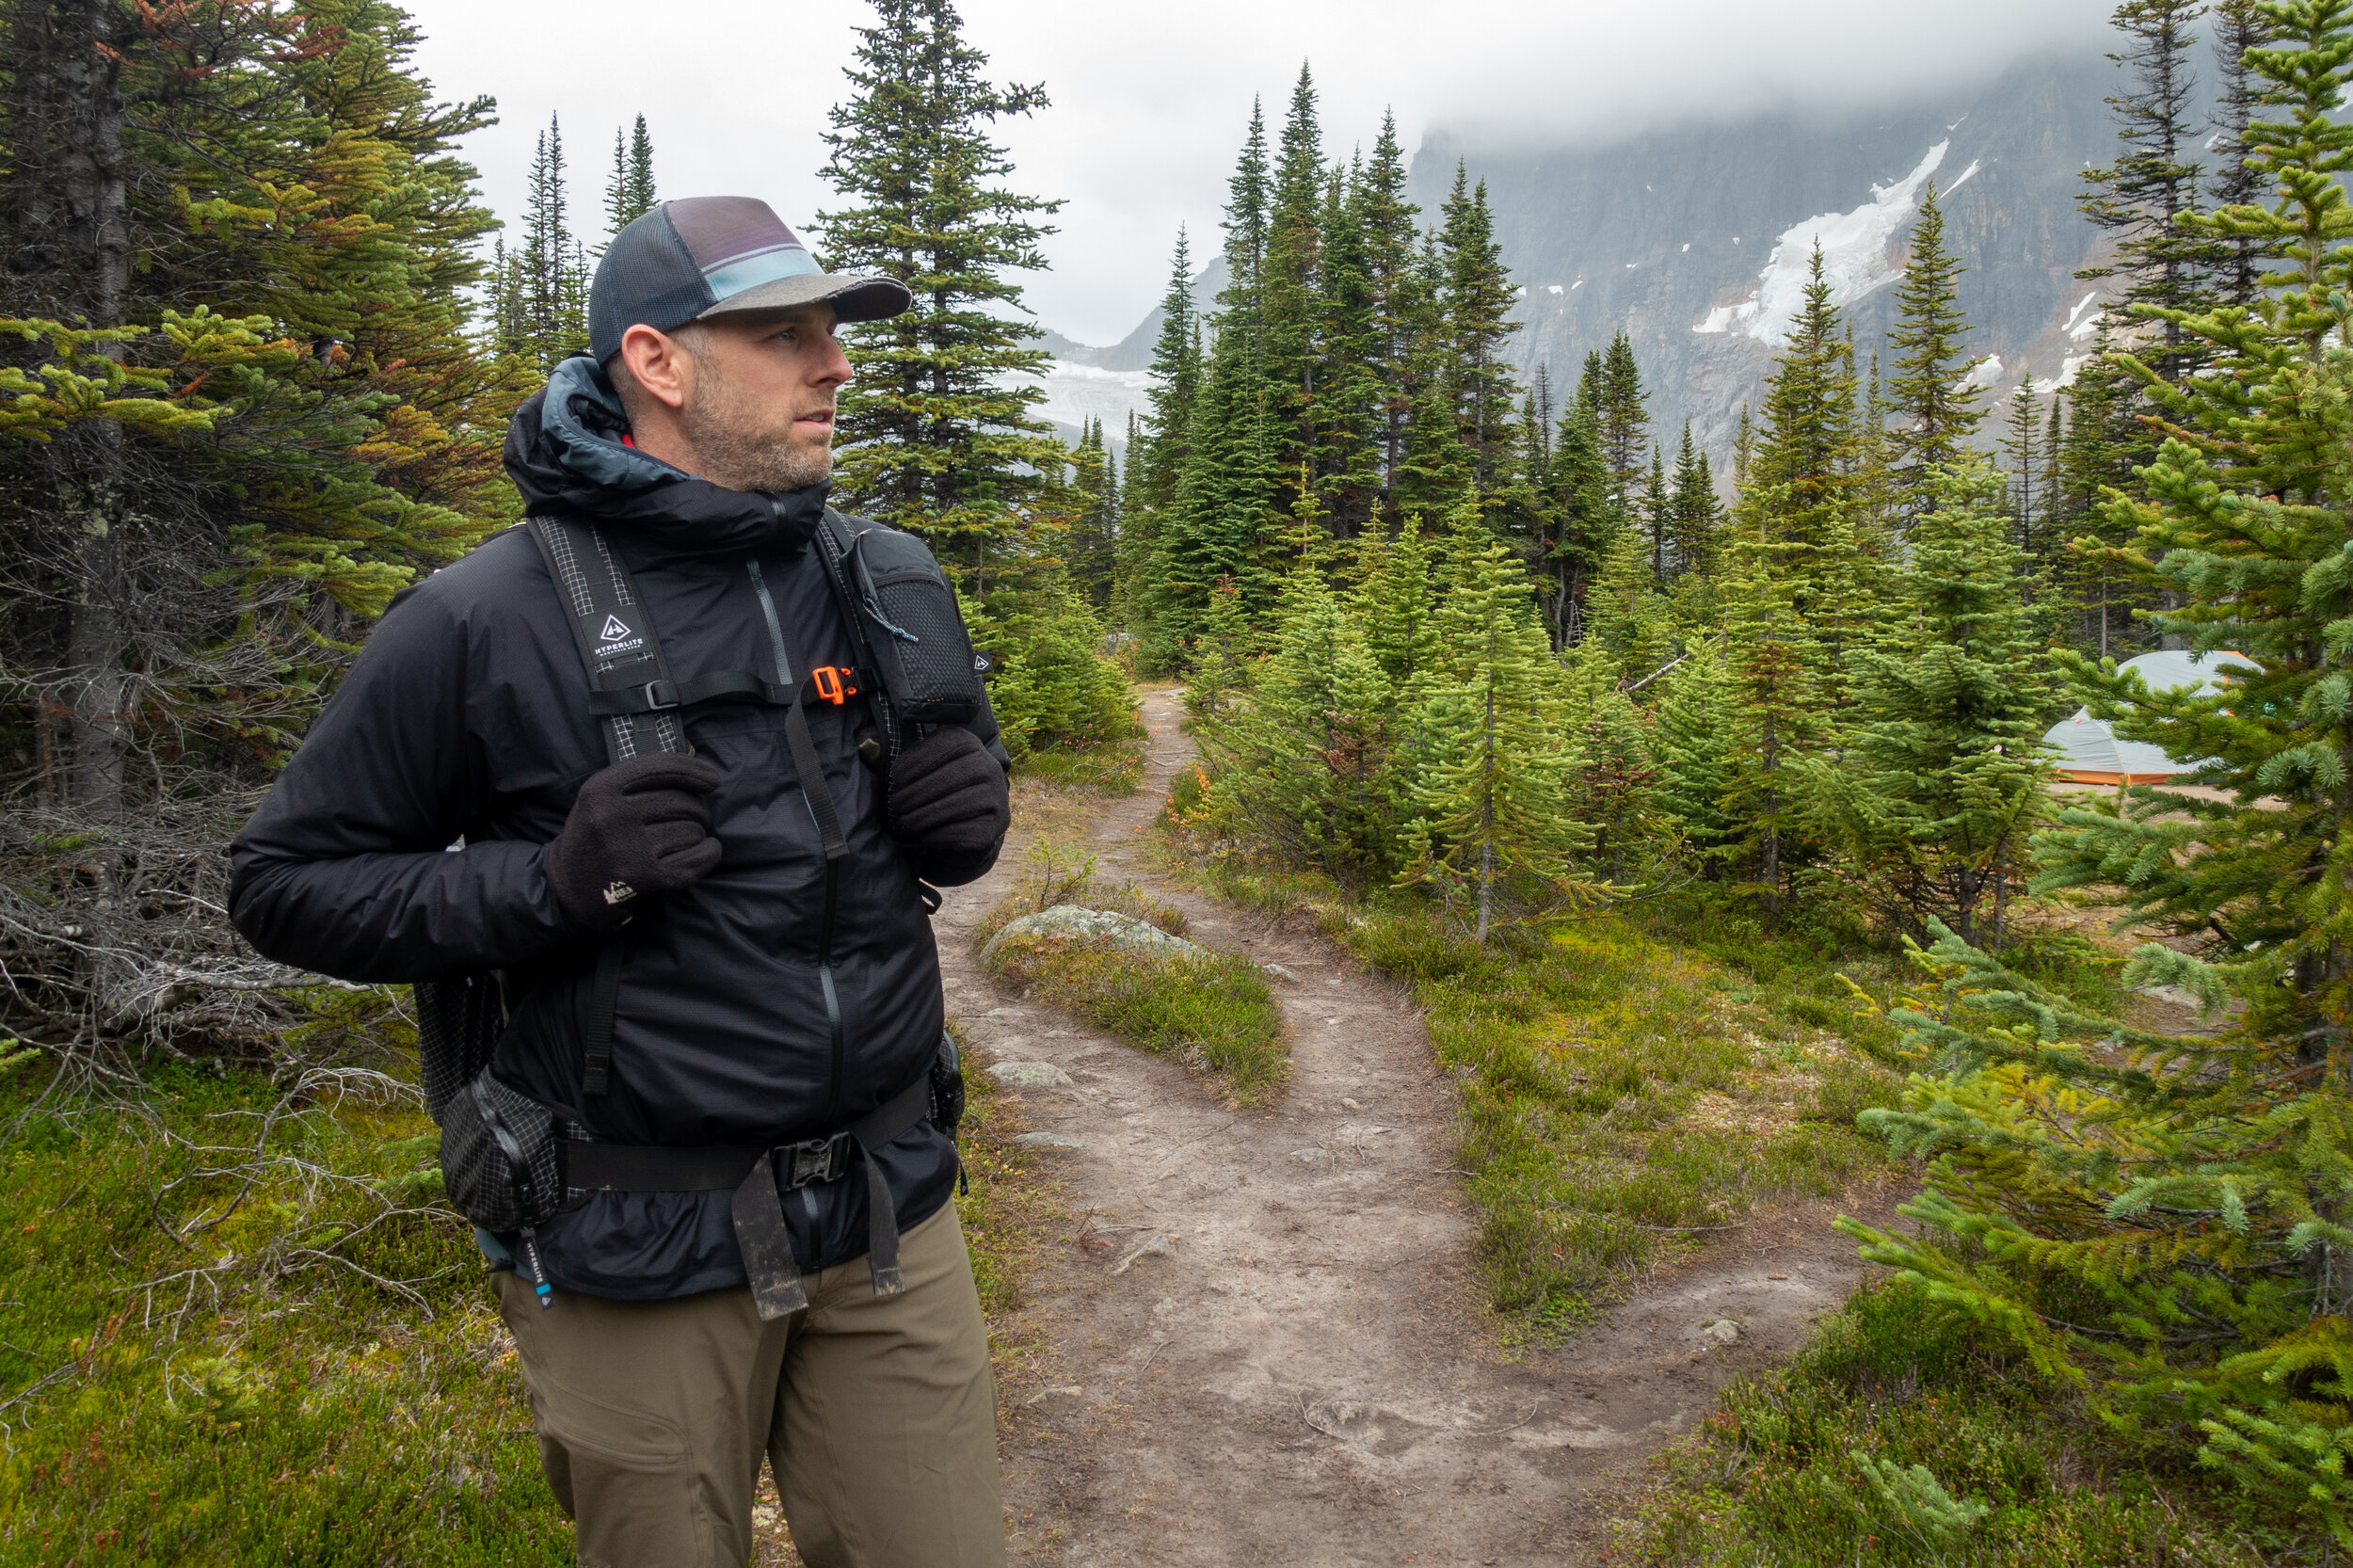 The Arc’teryx Zeta SL is one of the best top-quality lightweight rain jackets on the market.